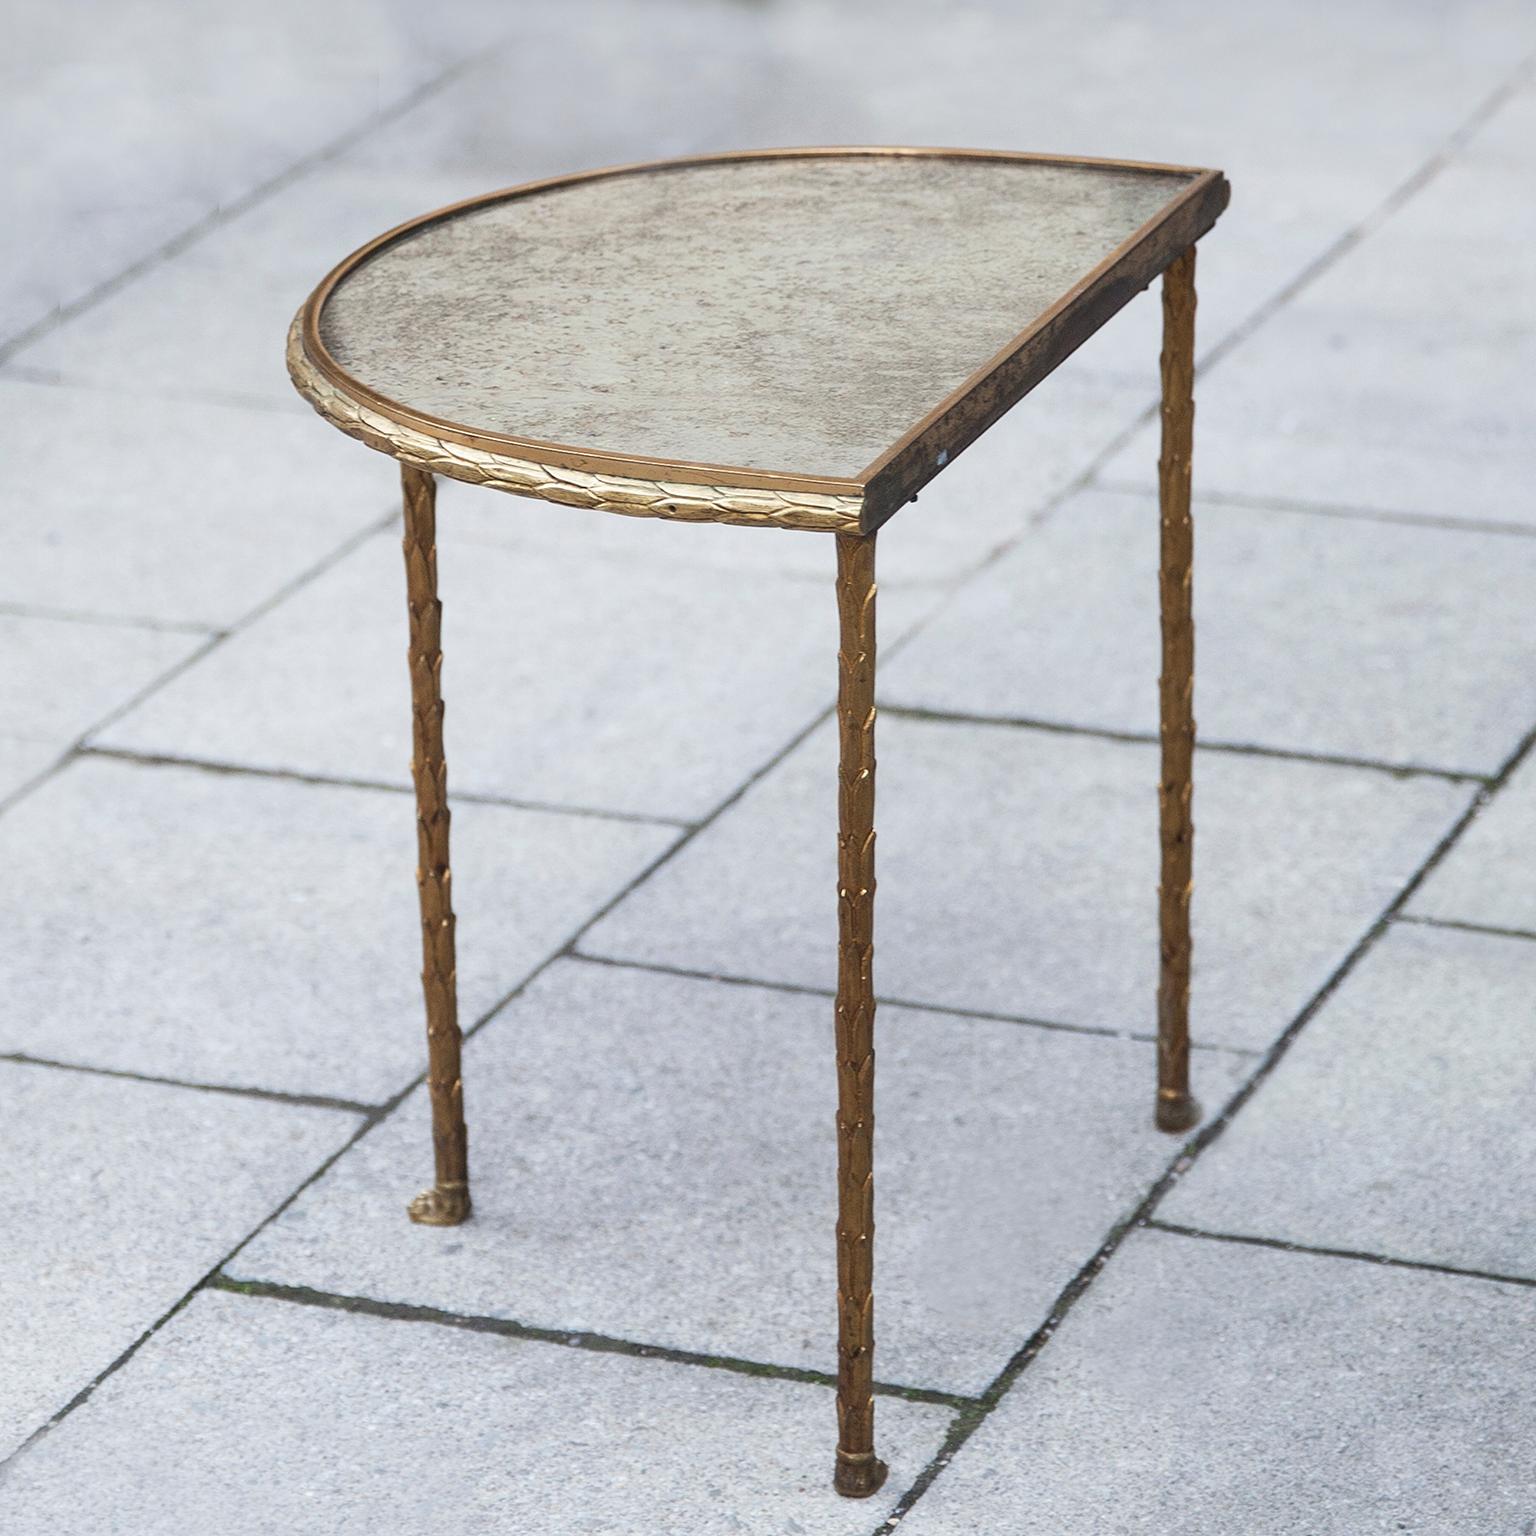 Amazing gilt bronze side table by Maison Bagues, France 1940, high end quality with a etched antic mirror top.